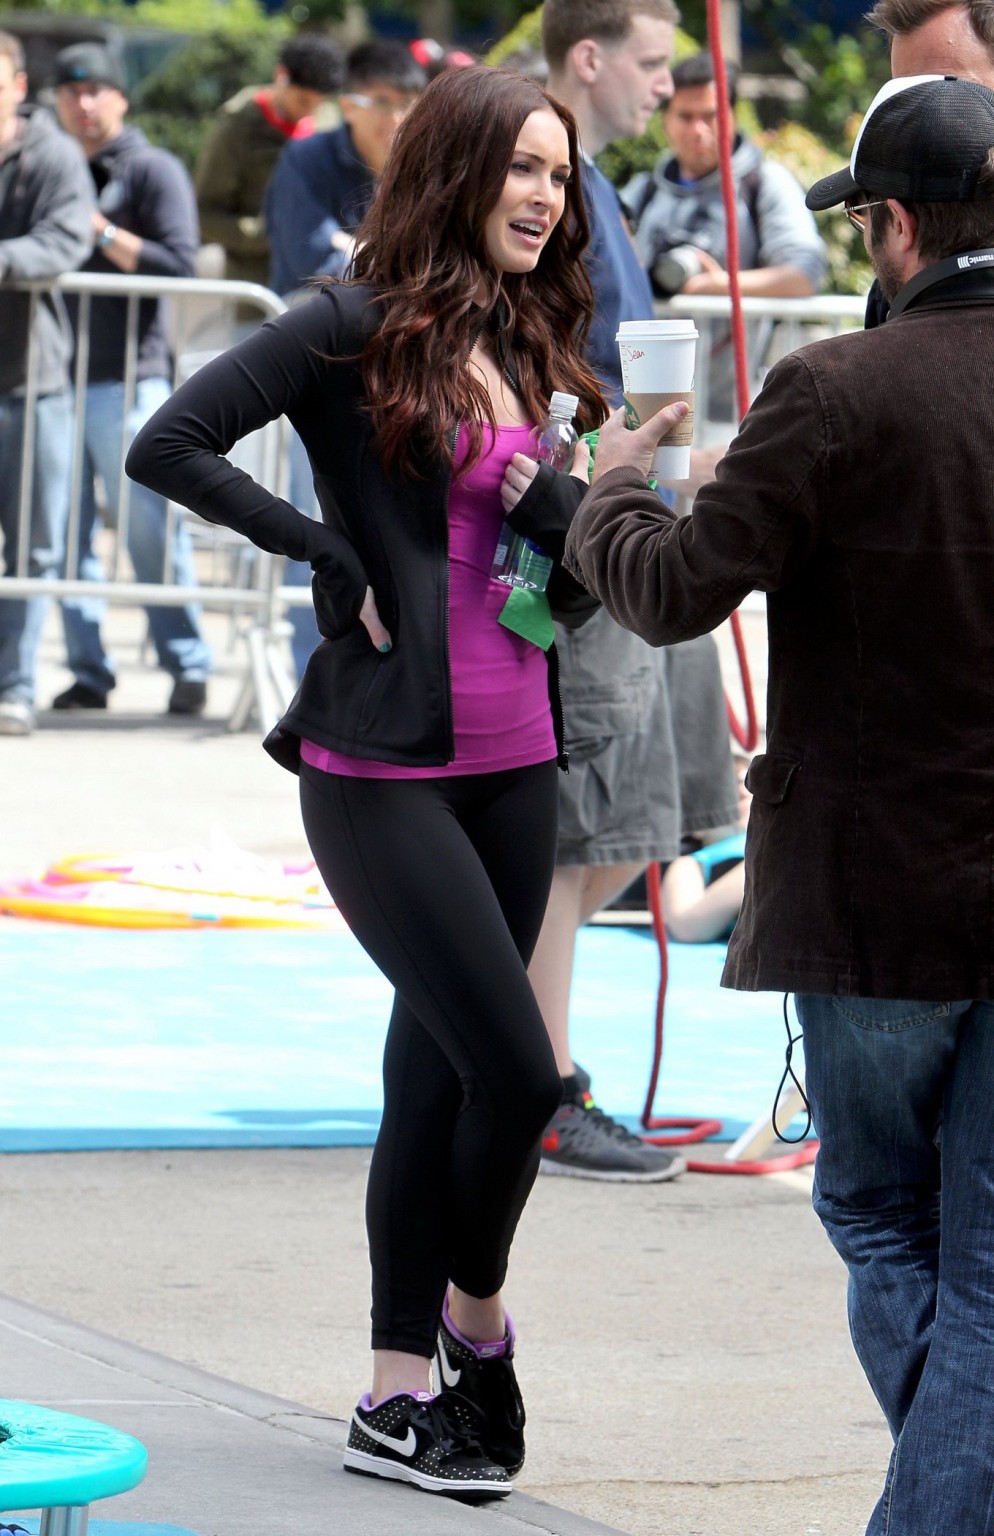 Megan Fox cleavy wearing tight outfit while jumps on trampoline at the TMNT set #75233071